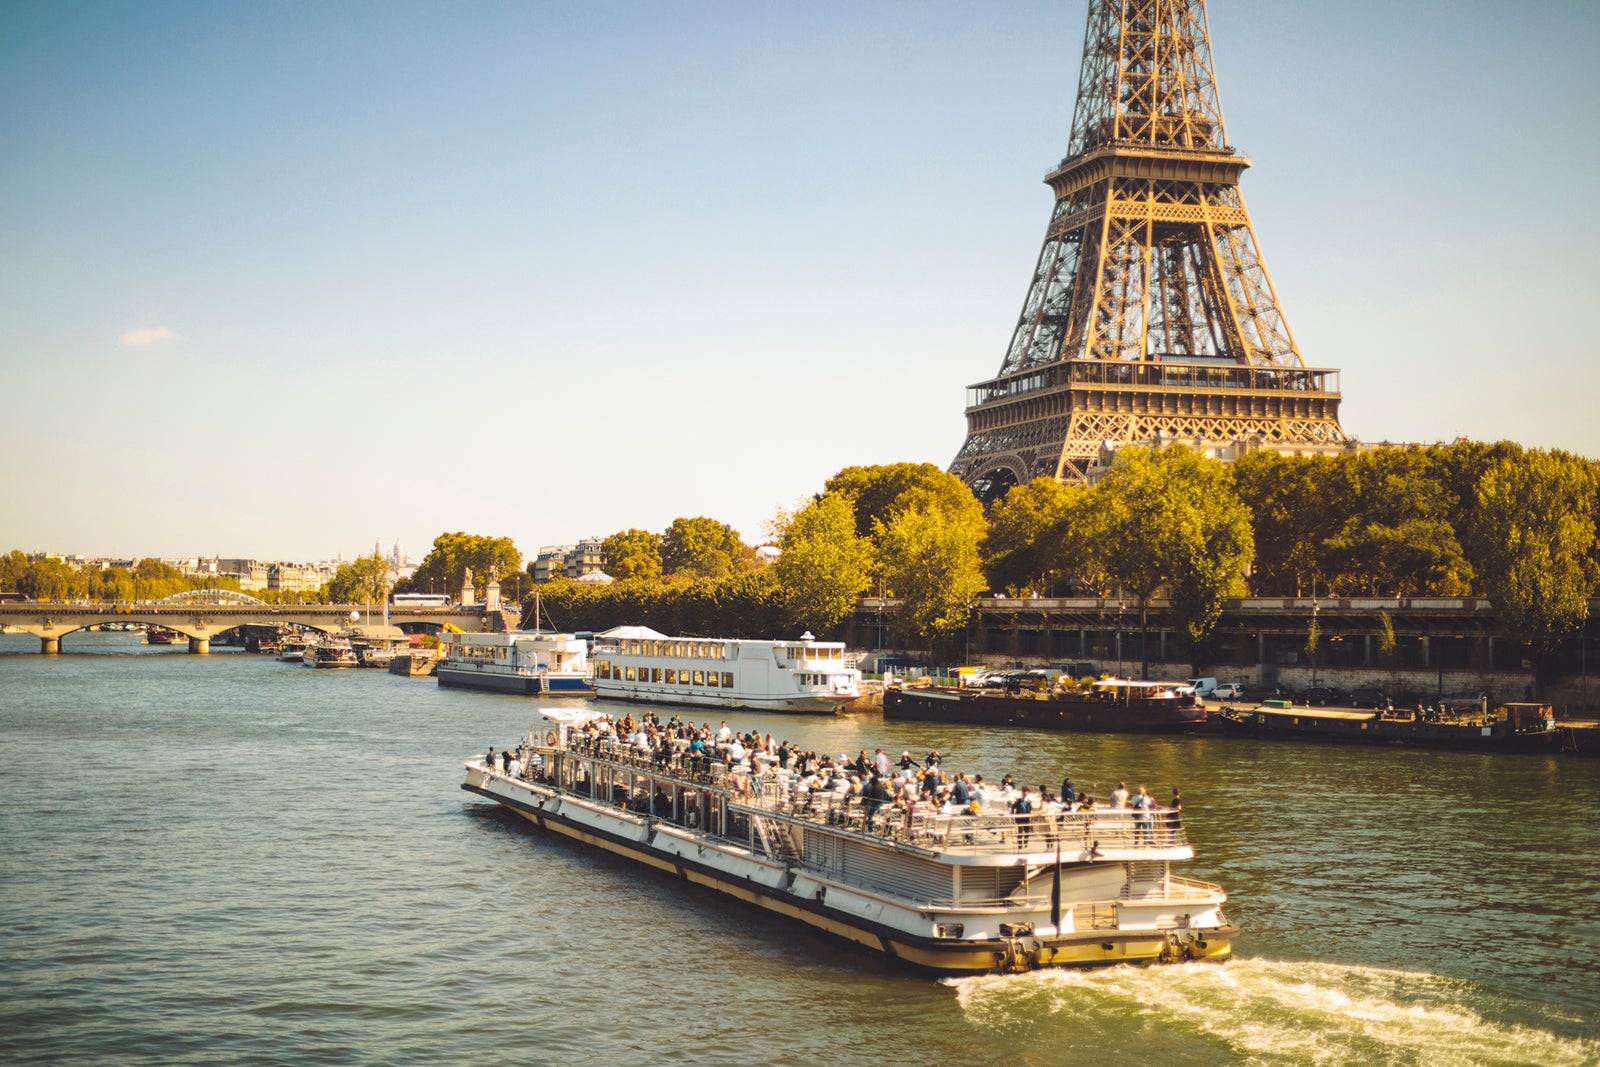 A river cruise boat sails along the Seine in front of the Eiffel Tower in Paris